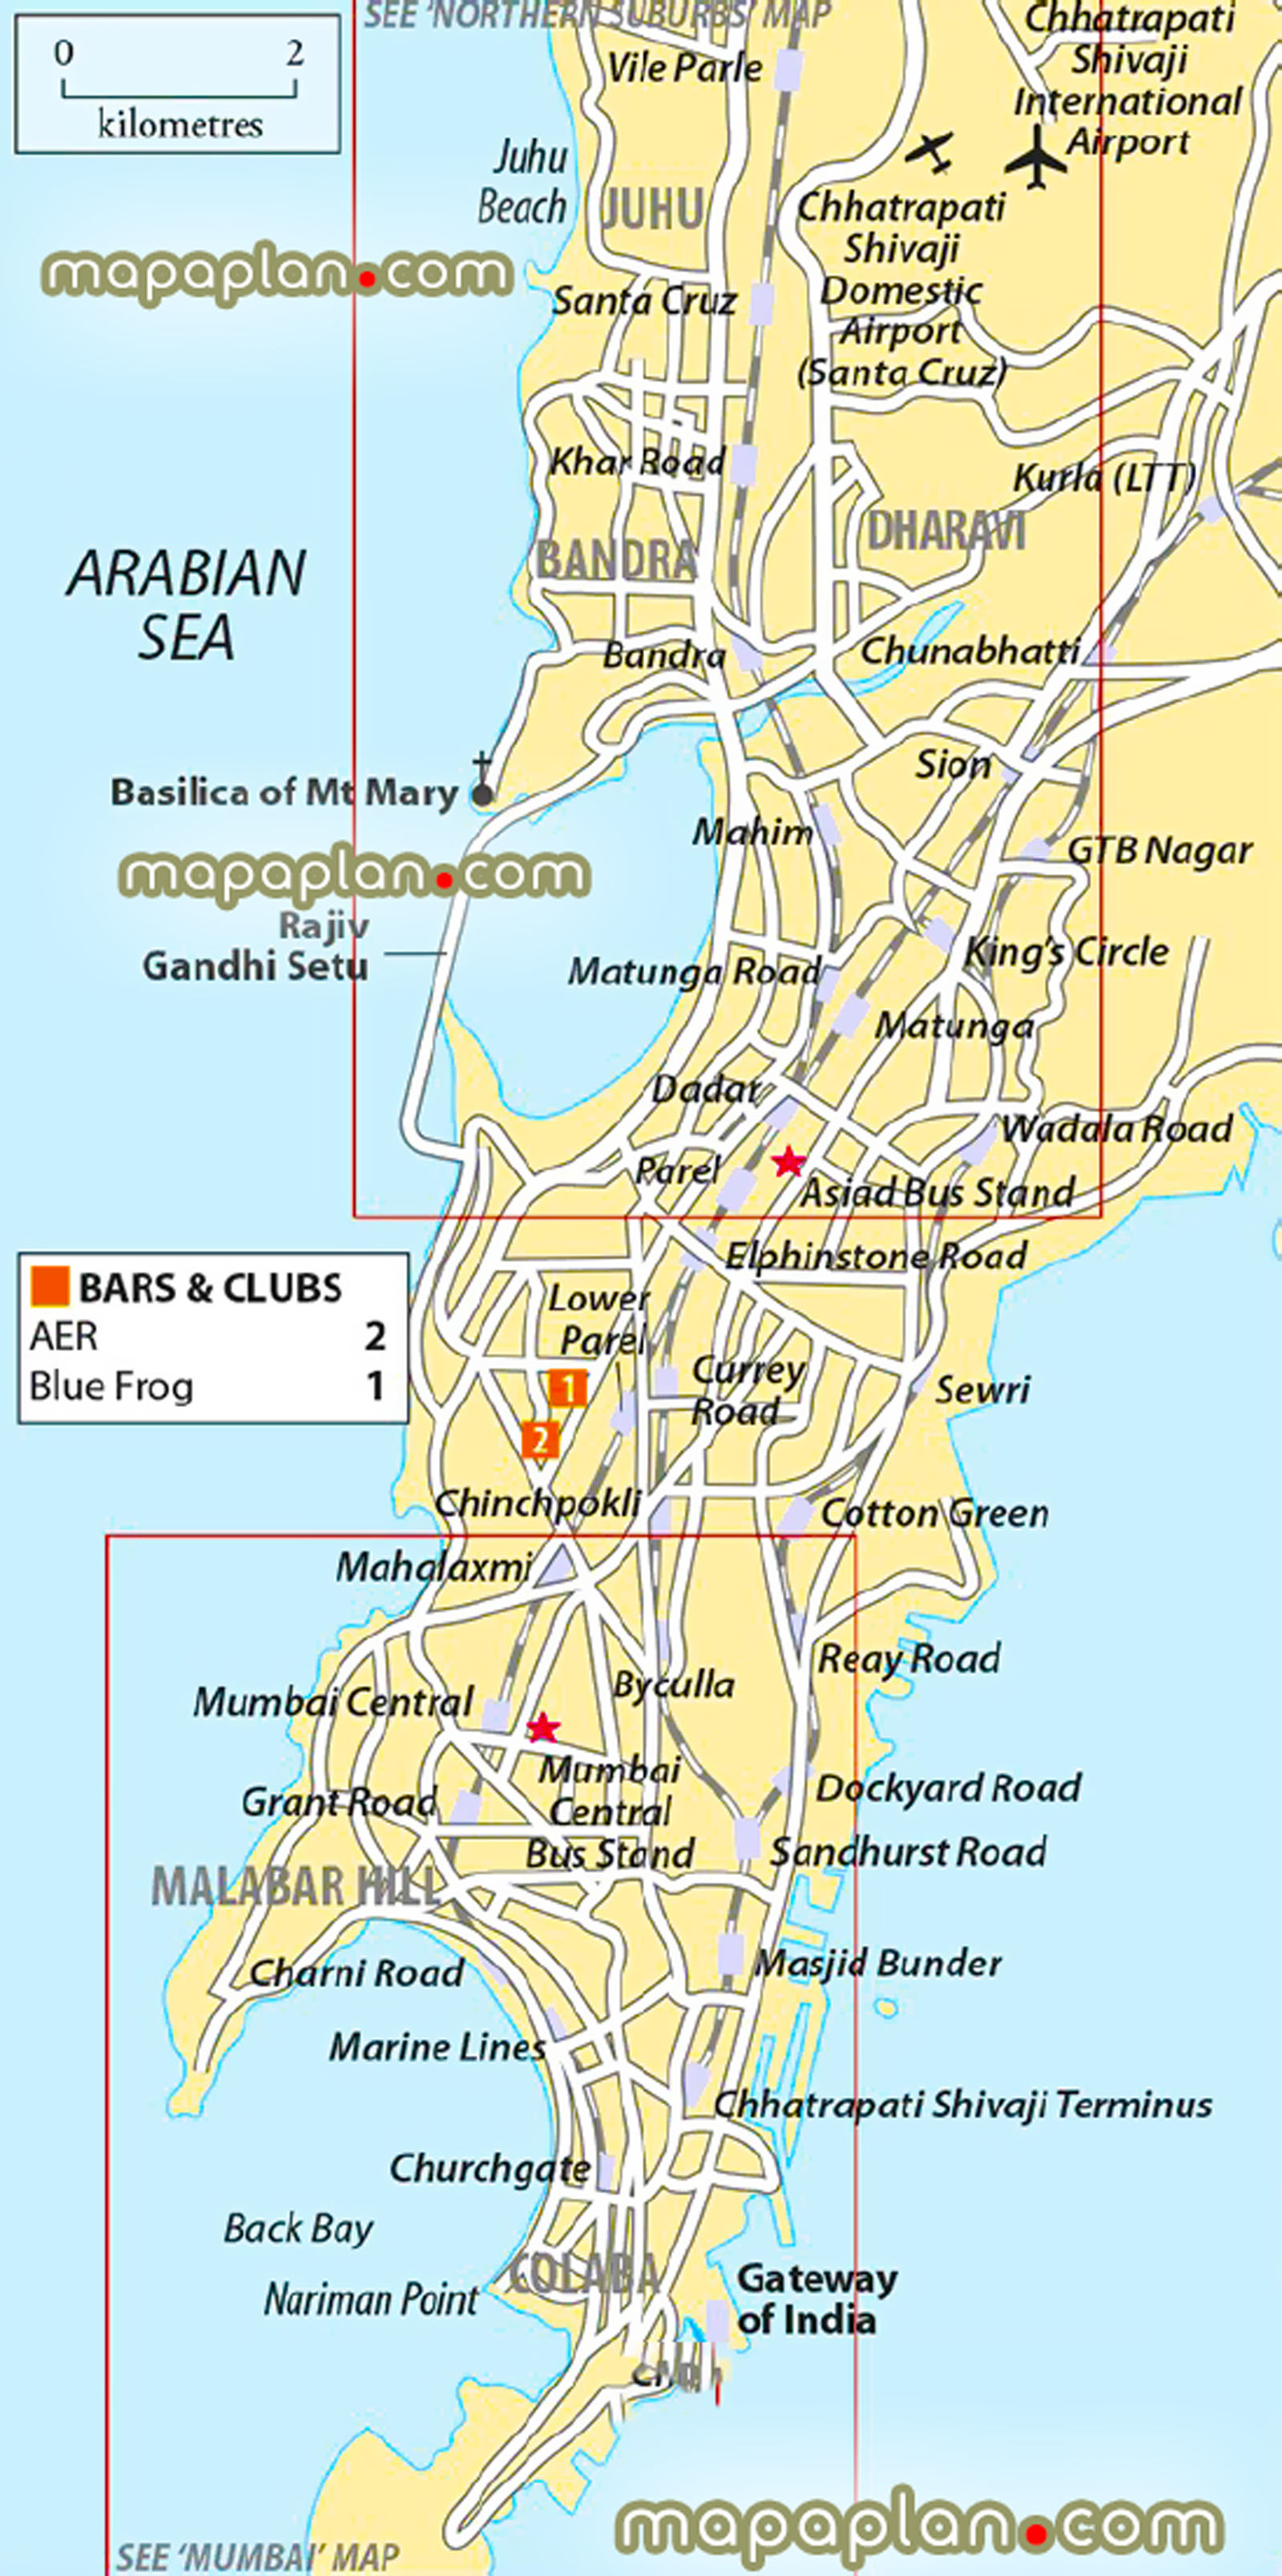 Mumbai greater metropolitan area downloadable city break historical places visit plan neighbourhoods major places visit streets churches temples mosques museums rail public transport interactive virtual directions sightseeing places best sights destinations visits Mumbai Top tourist attractions map